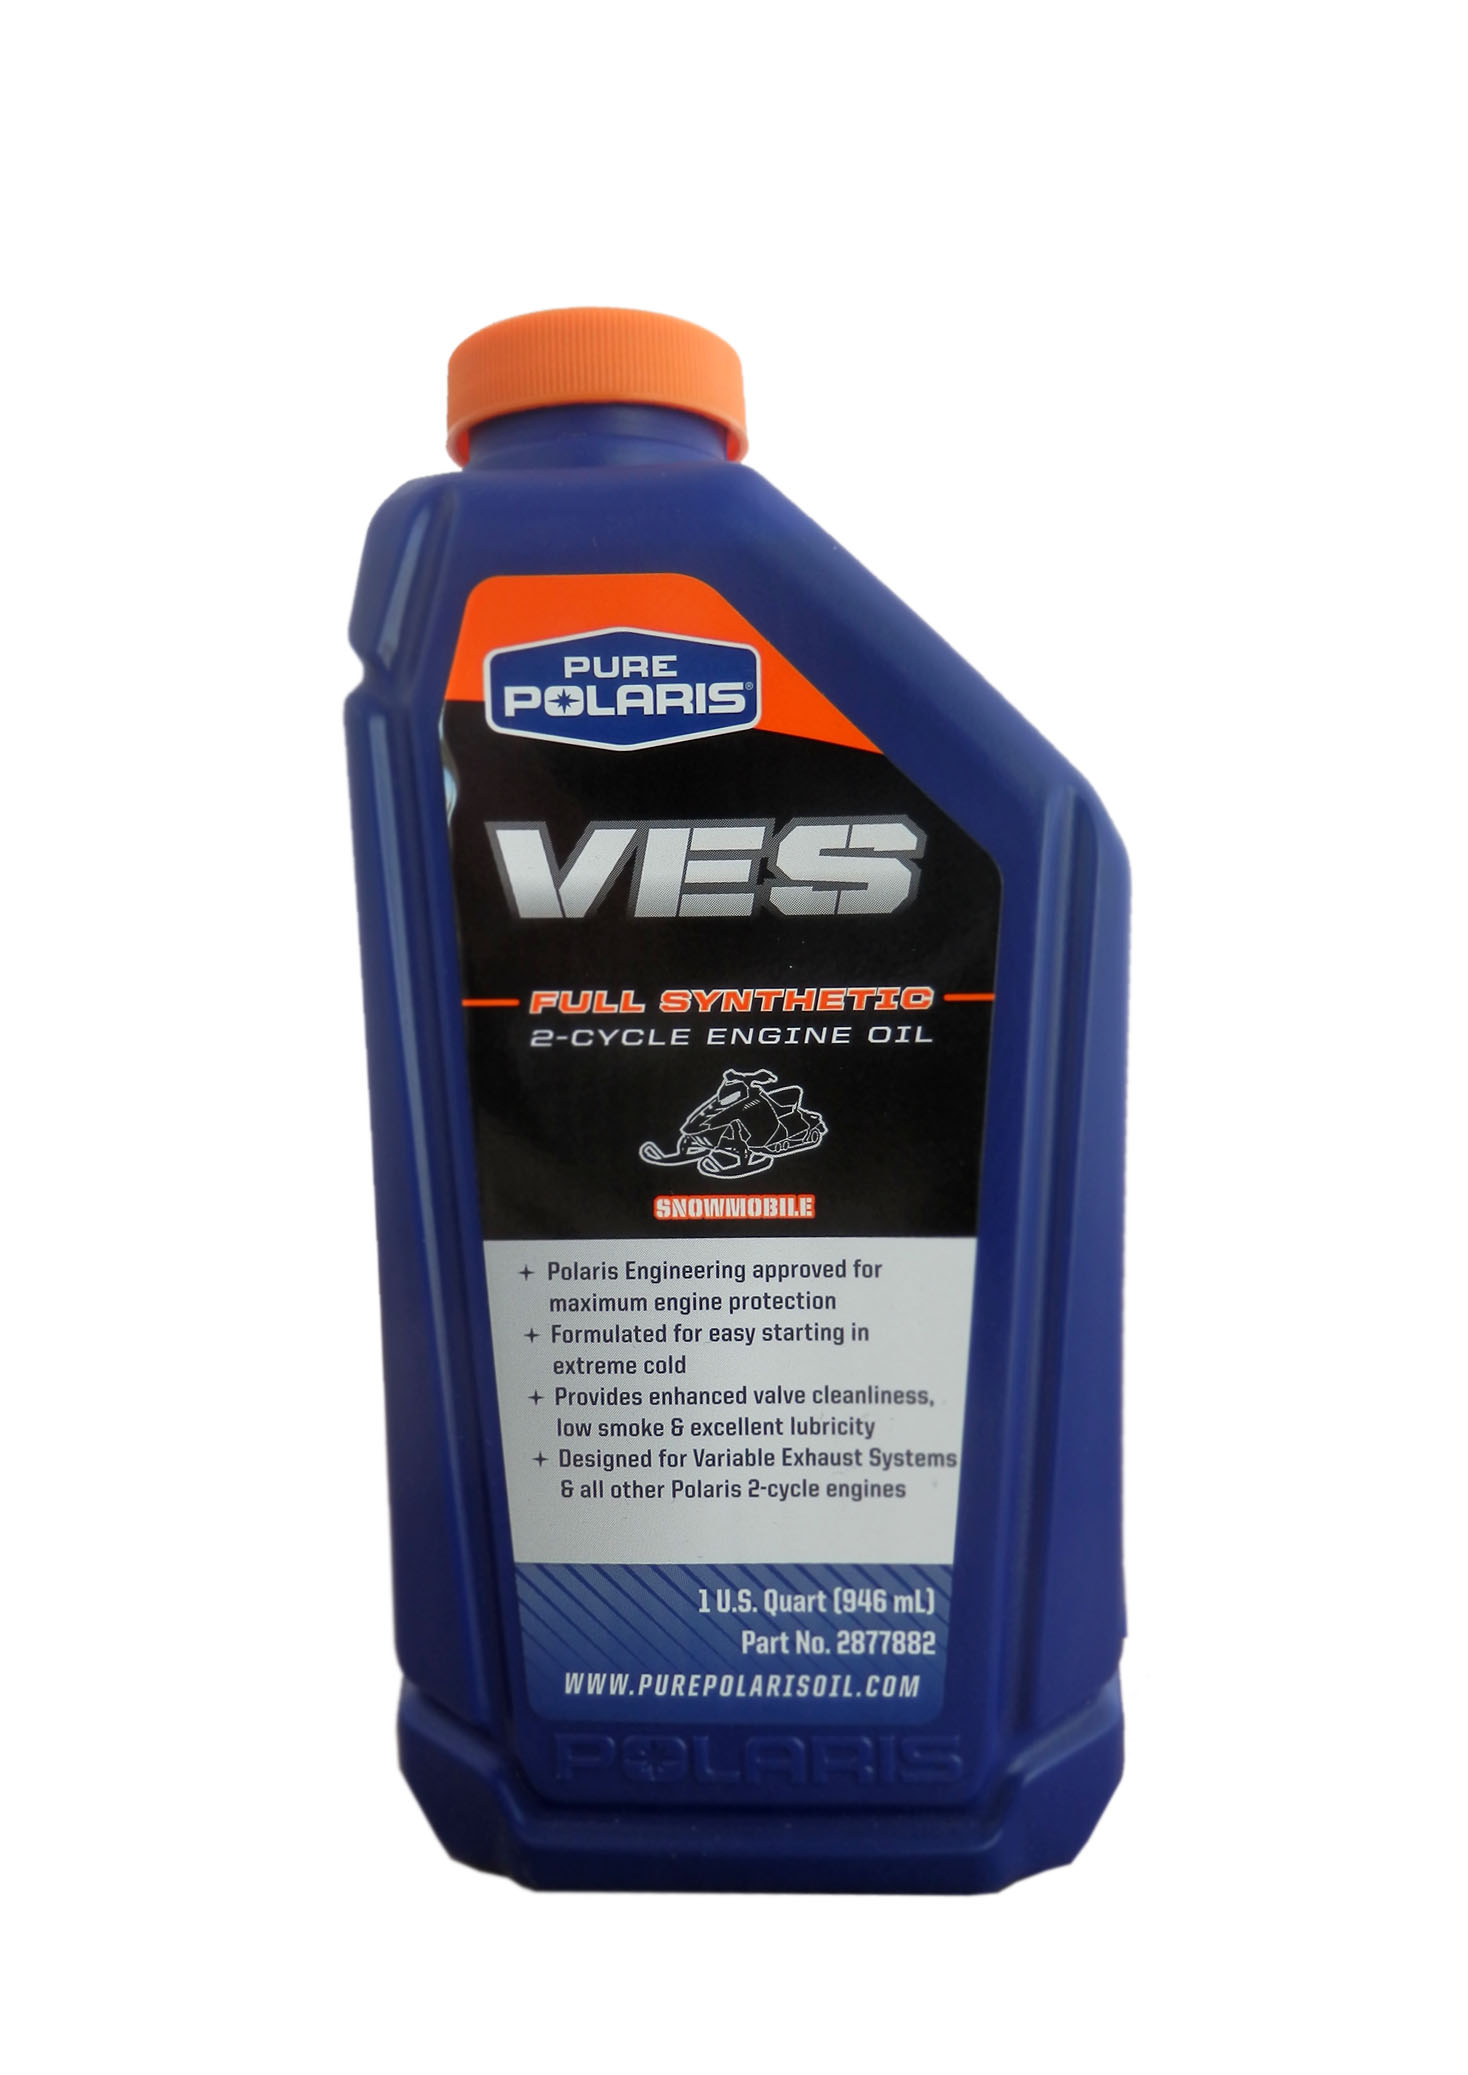 Моторное масло Polaris 2877882 VES Full Synthetic 2-cycle Engine Oil  0.946 л